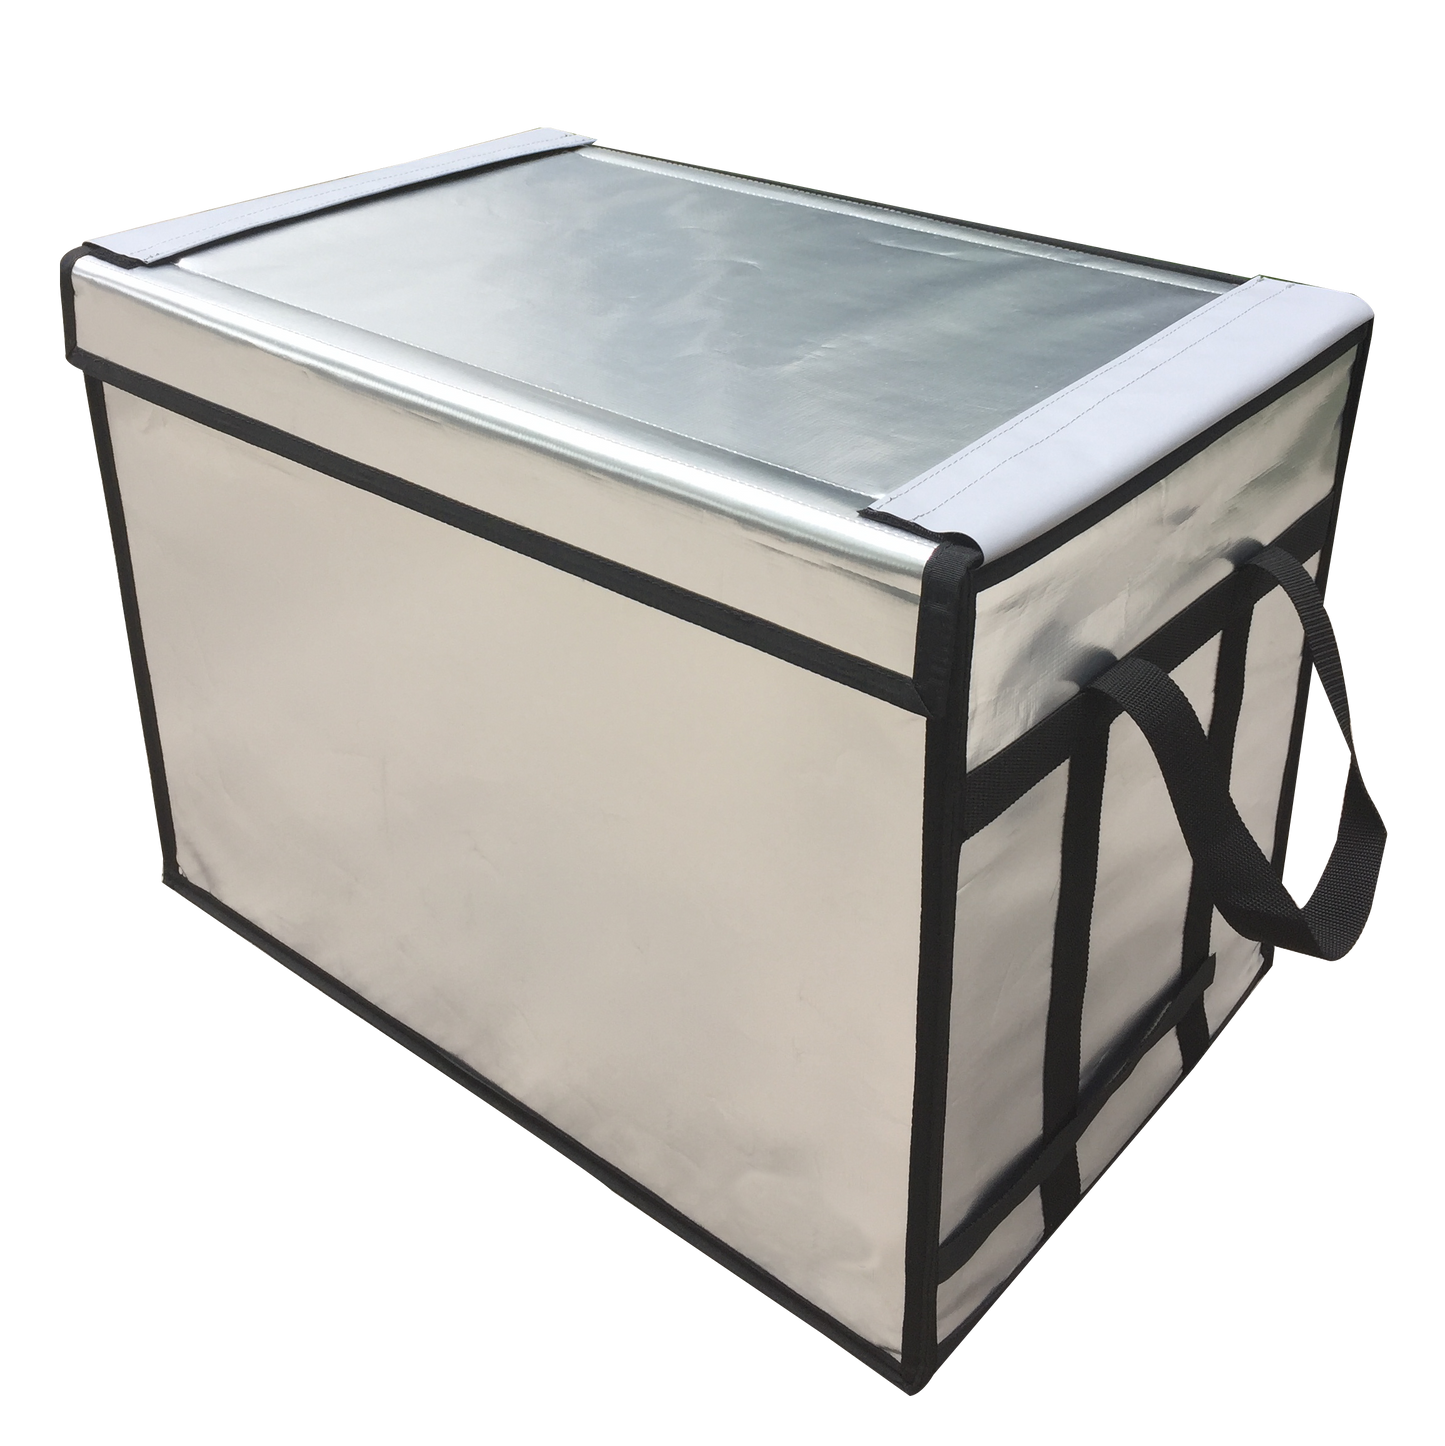 J-BOX FRESH ONE Multi-purpose foldable cooling box with high-performance insulation